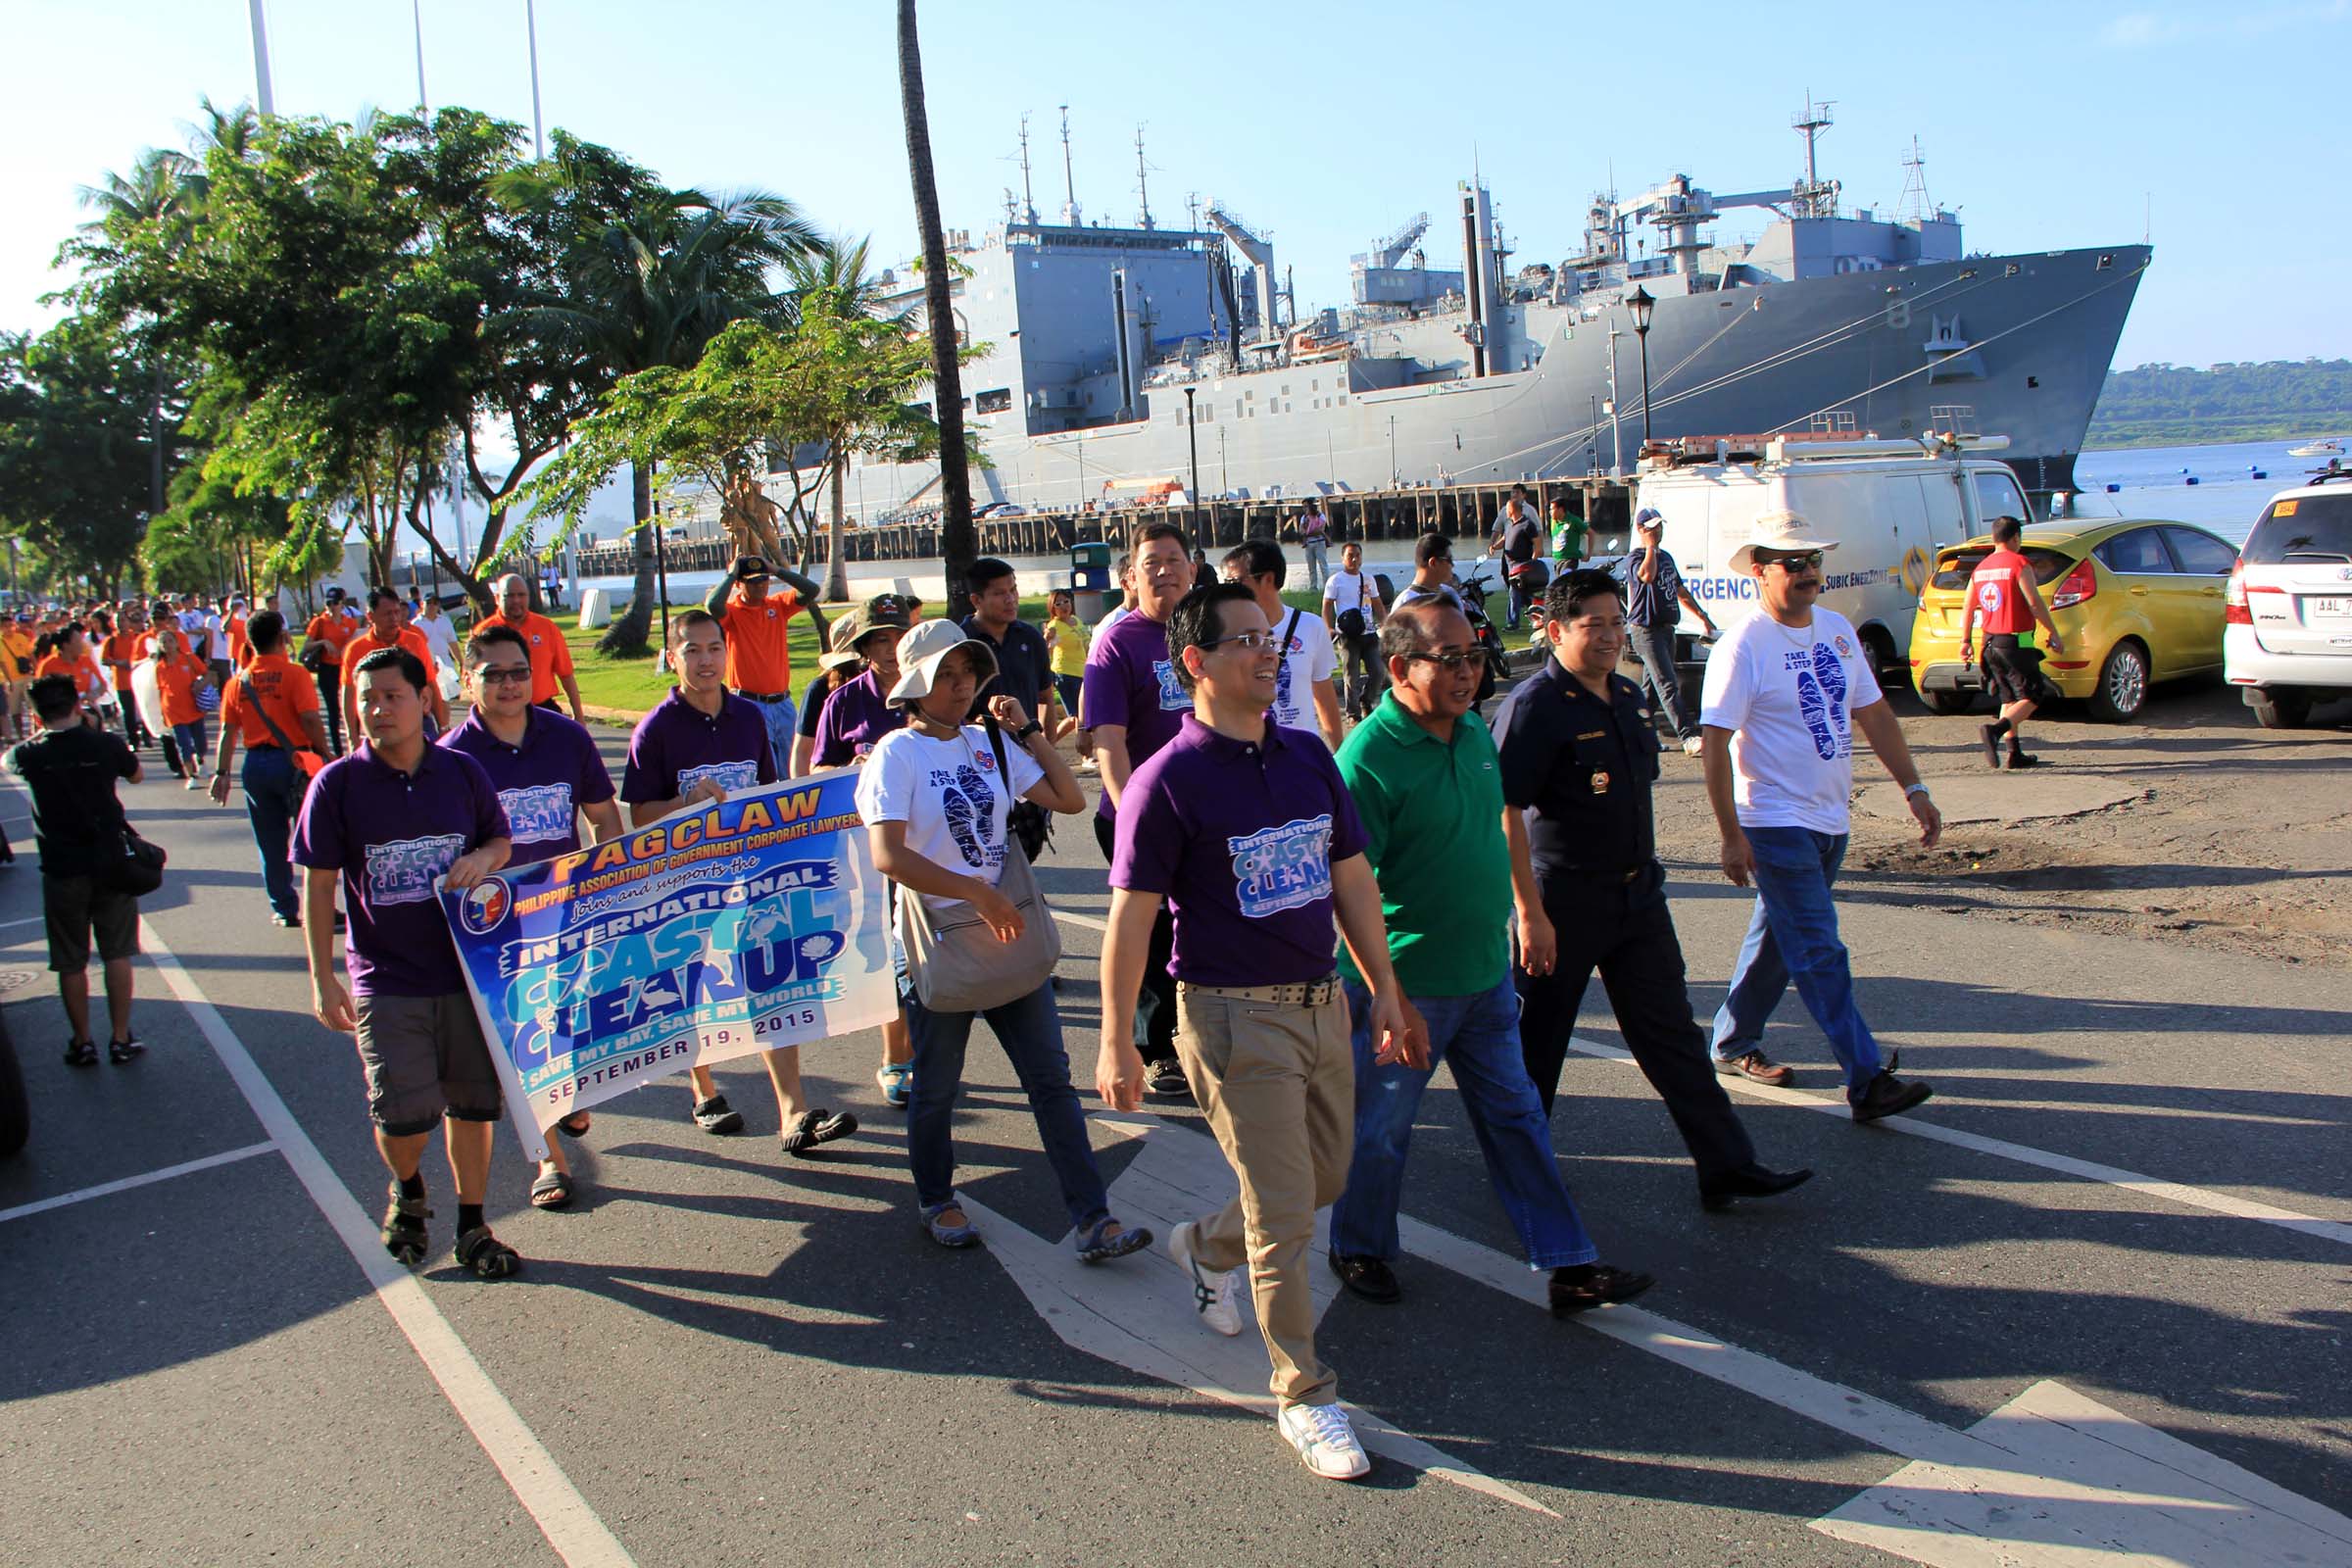 Justice Raoul Creencia (left), government counsel at the Office of Government Controlled Corporations, joins SBMA Chairman Roberto Garcia and other SBMA officials in a march to kick off the 2015 edition of the International Coastal Clean-up in the Subic Bay Freeport. With them are Deputy Administrator (SDA) for Legal Affairs Atty. Randy Escolango and SDA for Regulatory Group Atty. Chot Kabigting. More than 50,000 volunteers from Subic Bay Freeport, Olongapo City, and province of Zambales took part in the annual cleanup event.